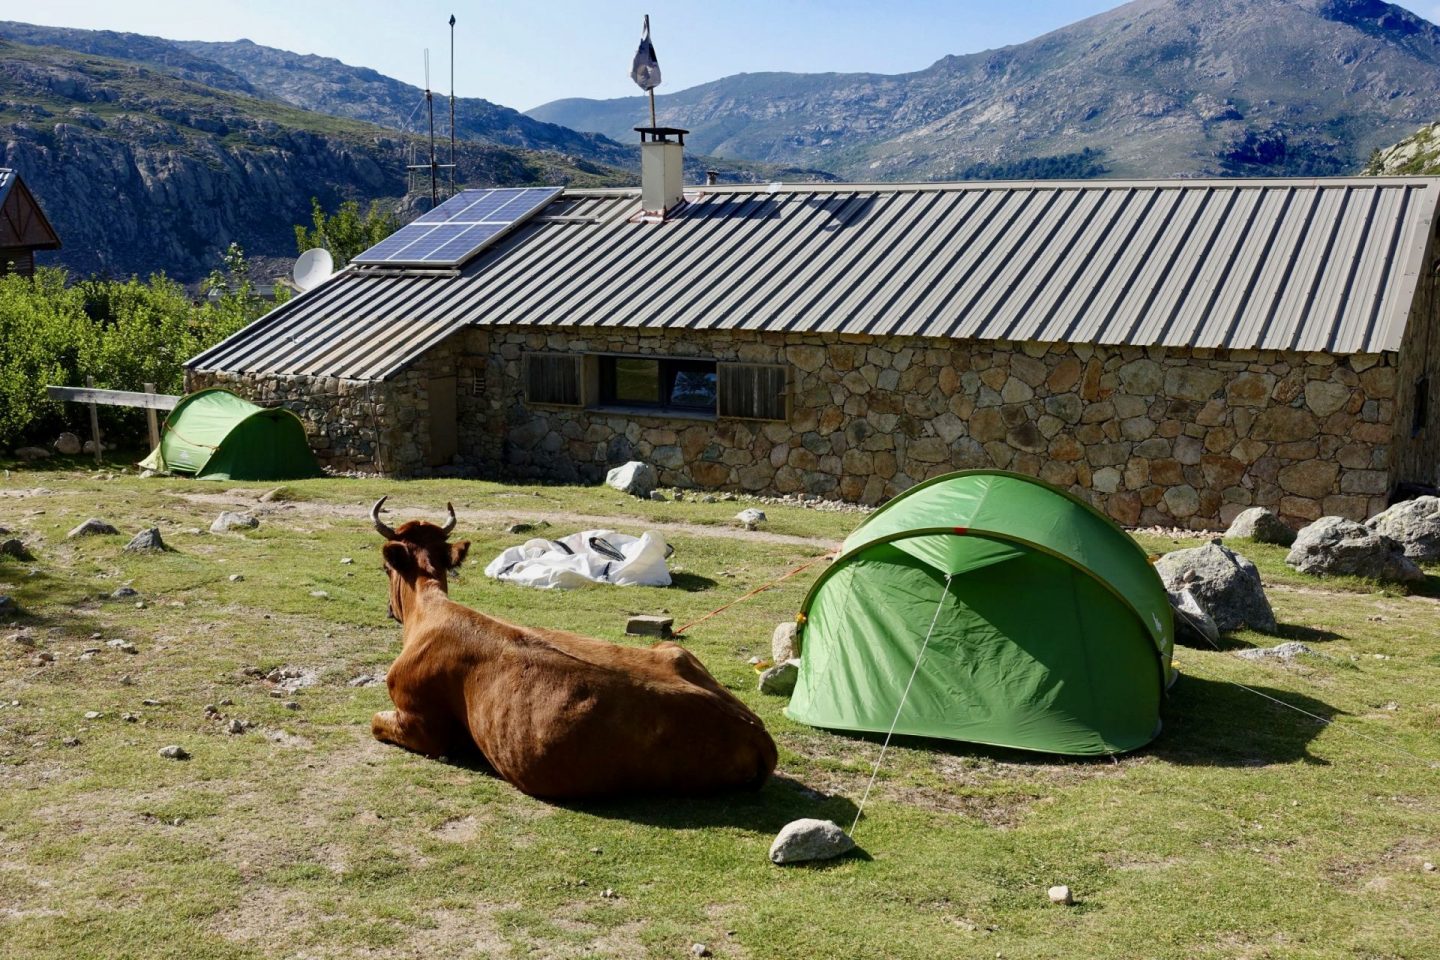 A GR20 mountain hut with a tent in front of it and a cow lying next to the tent